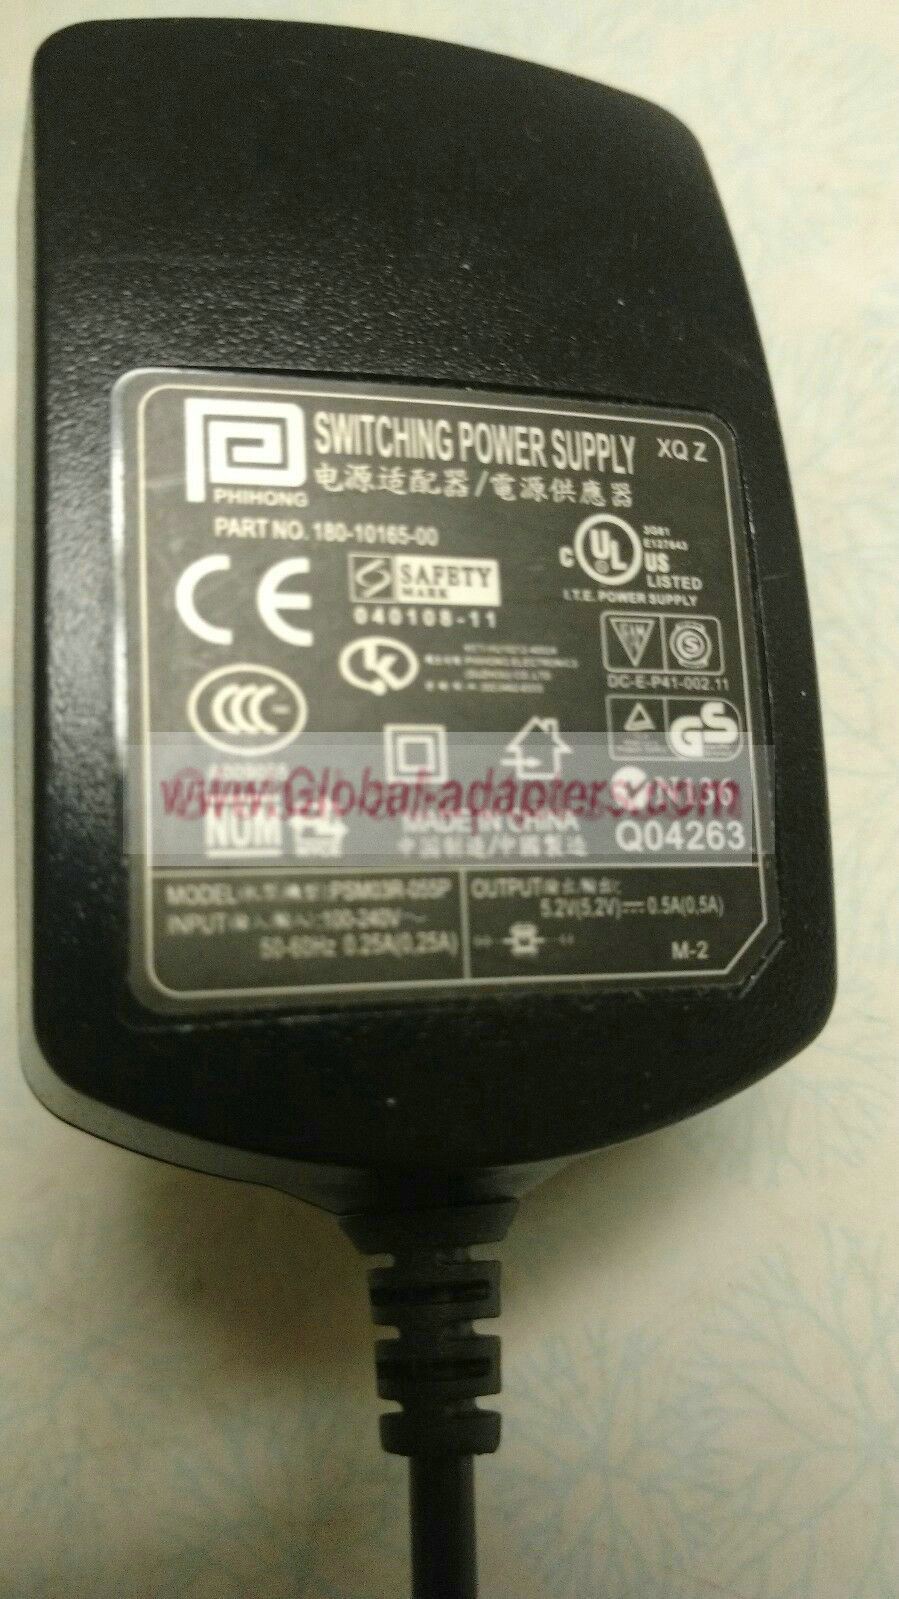 NEW 5.2V 0.5A Phihong 180-10165-00 PSM03R-055P AC Adapter